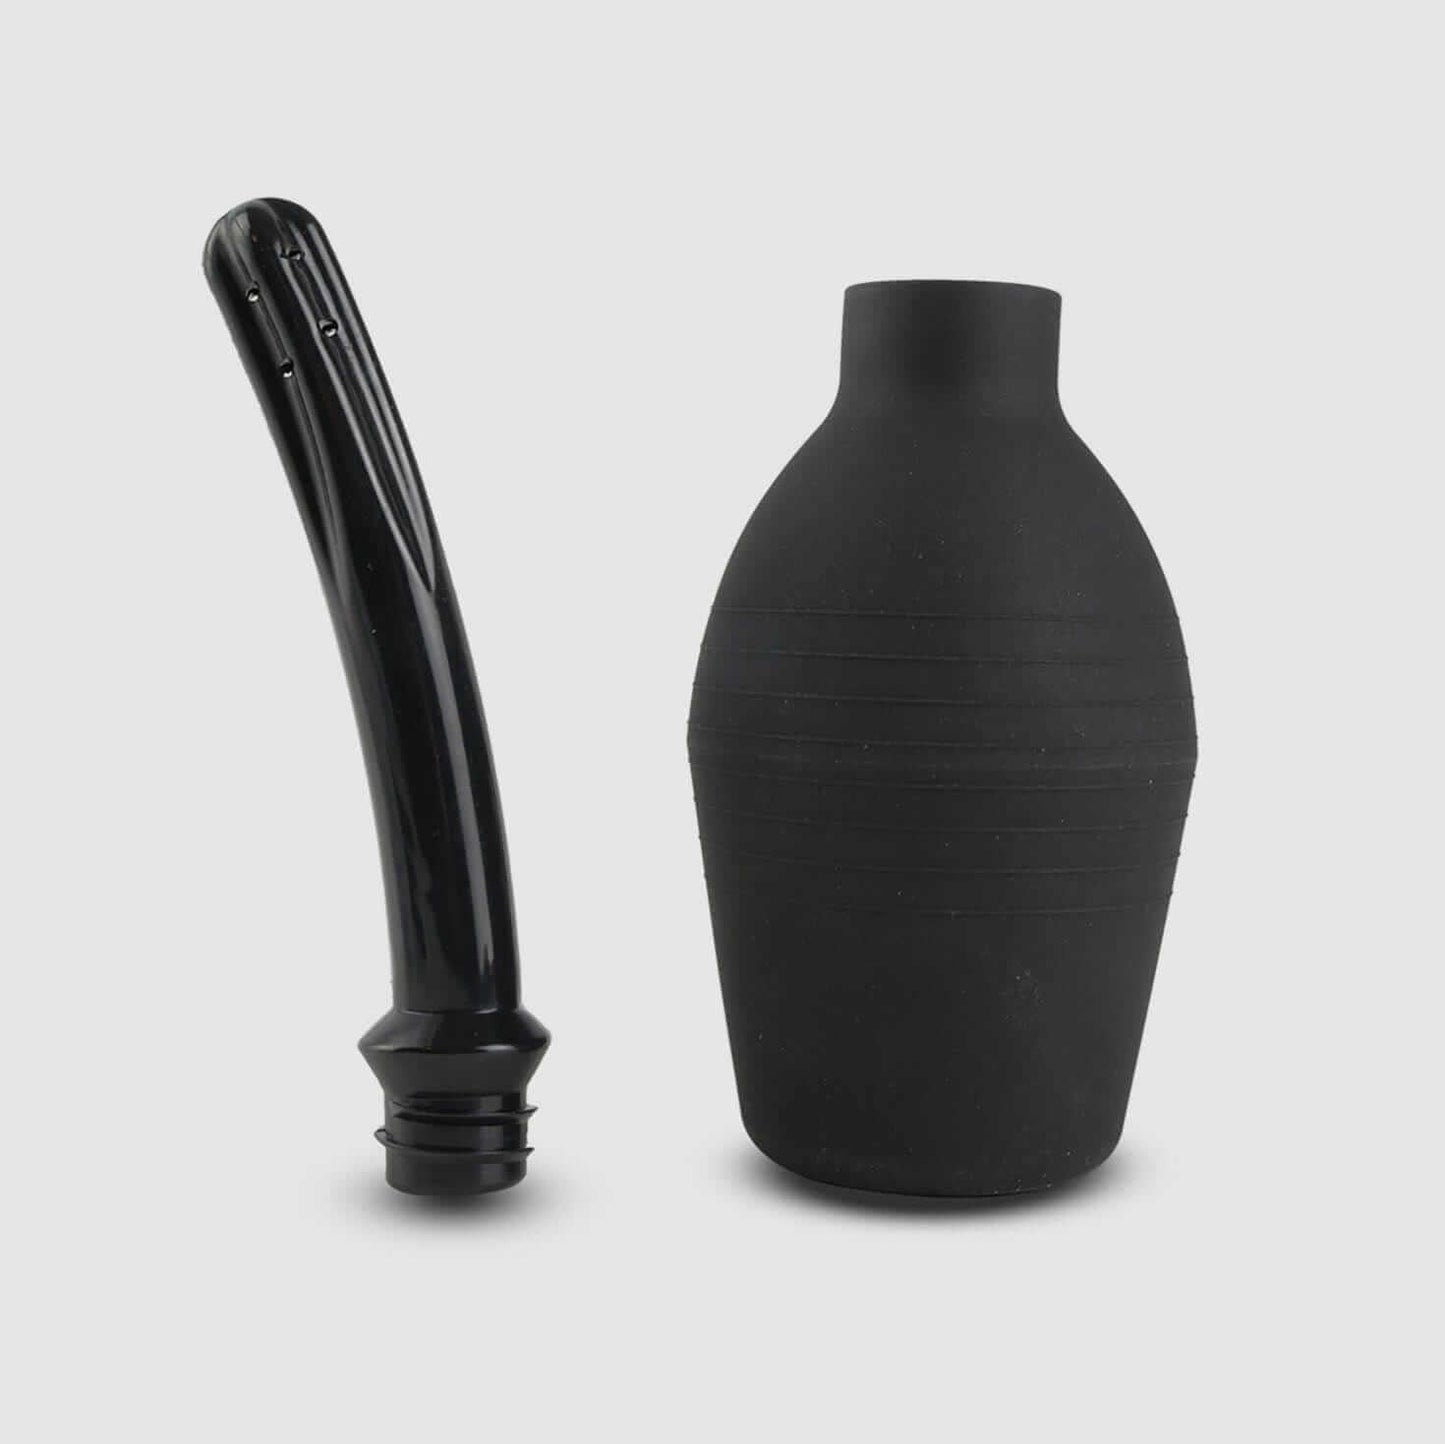 Curved Douche/Enema - Black, 300ml - Thorn & Feather Sex Toy Canada